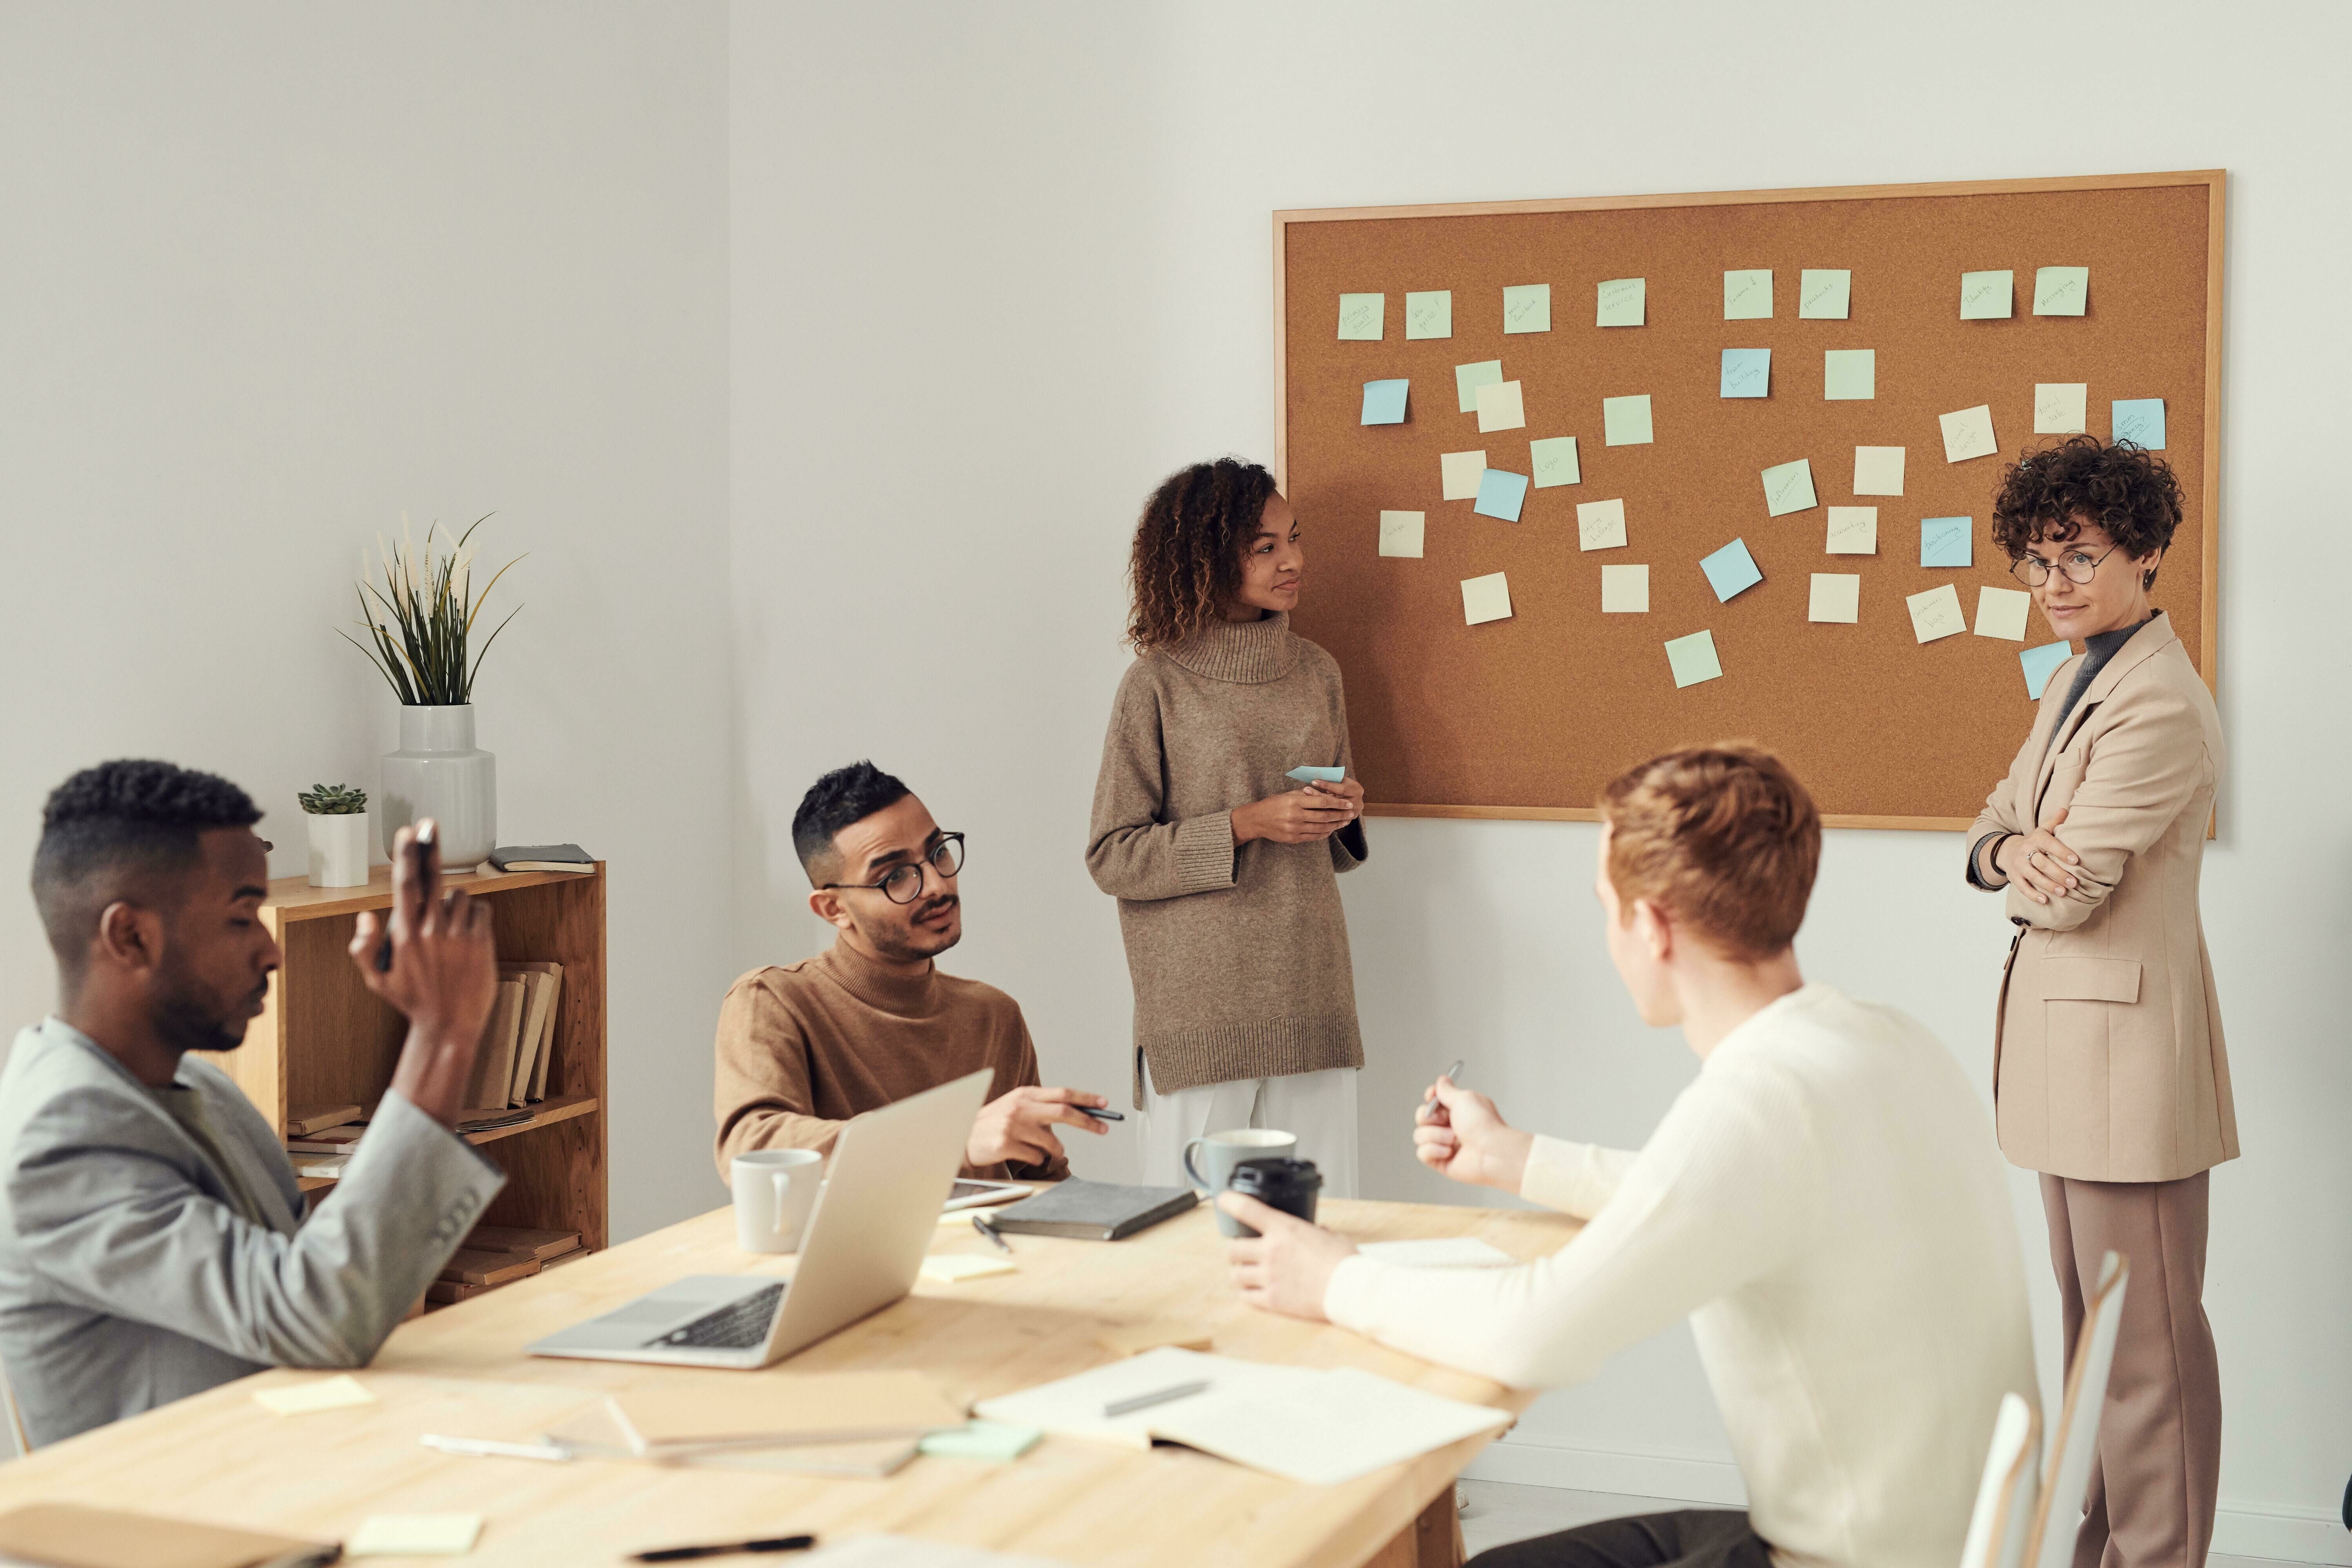 Product managers align and empower product team and stakeholders on creating products that solve a problem, have a high level of impact on users and are feasible to build and deliver within a relevant frame of time.